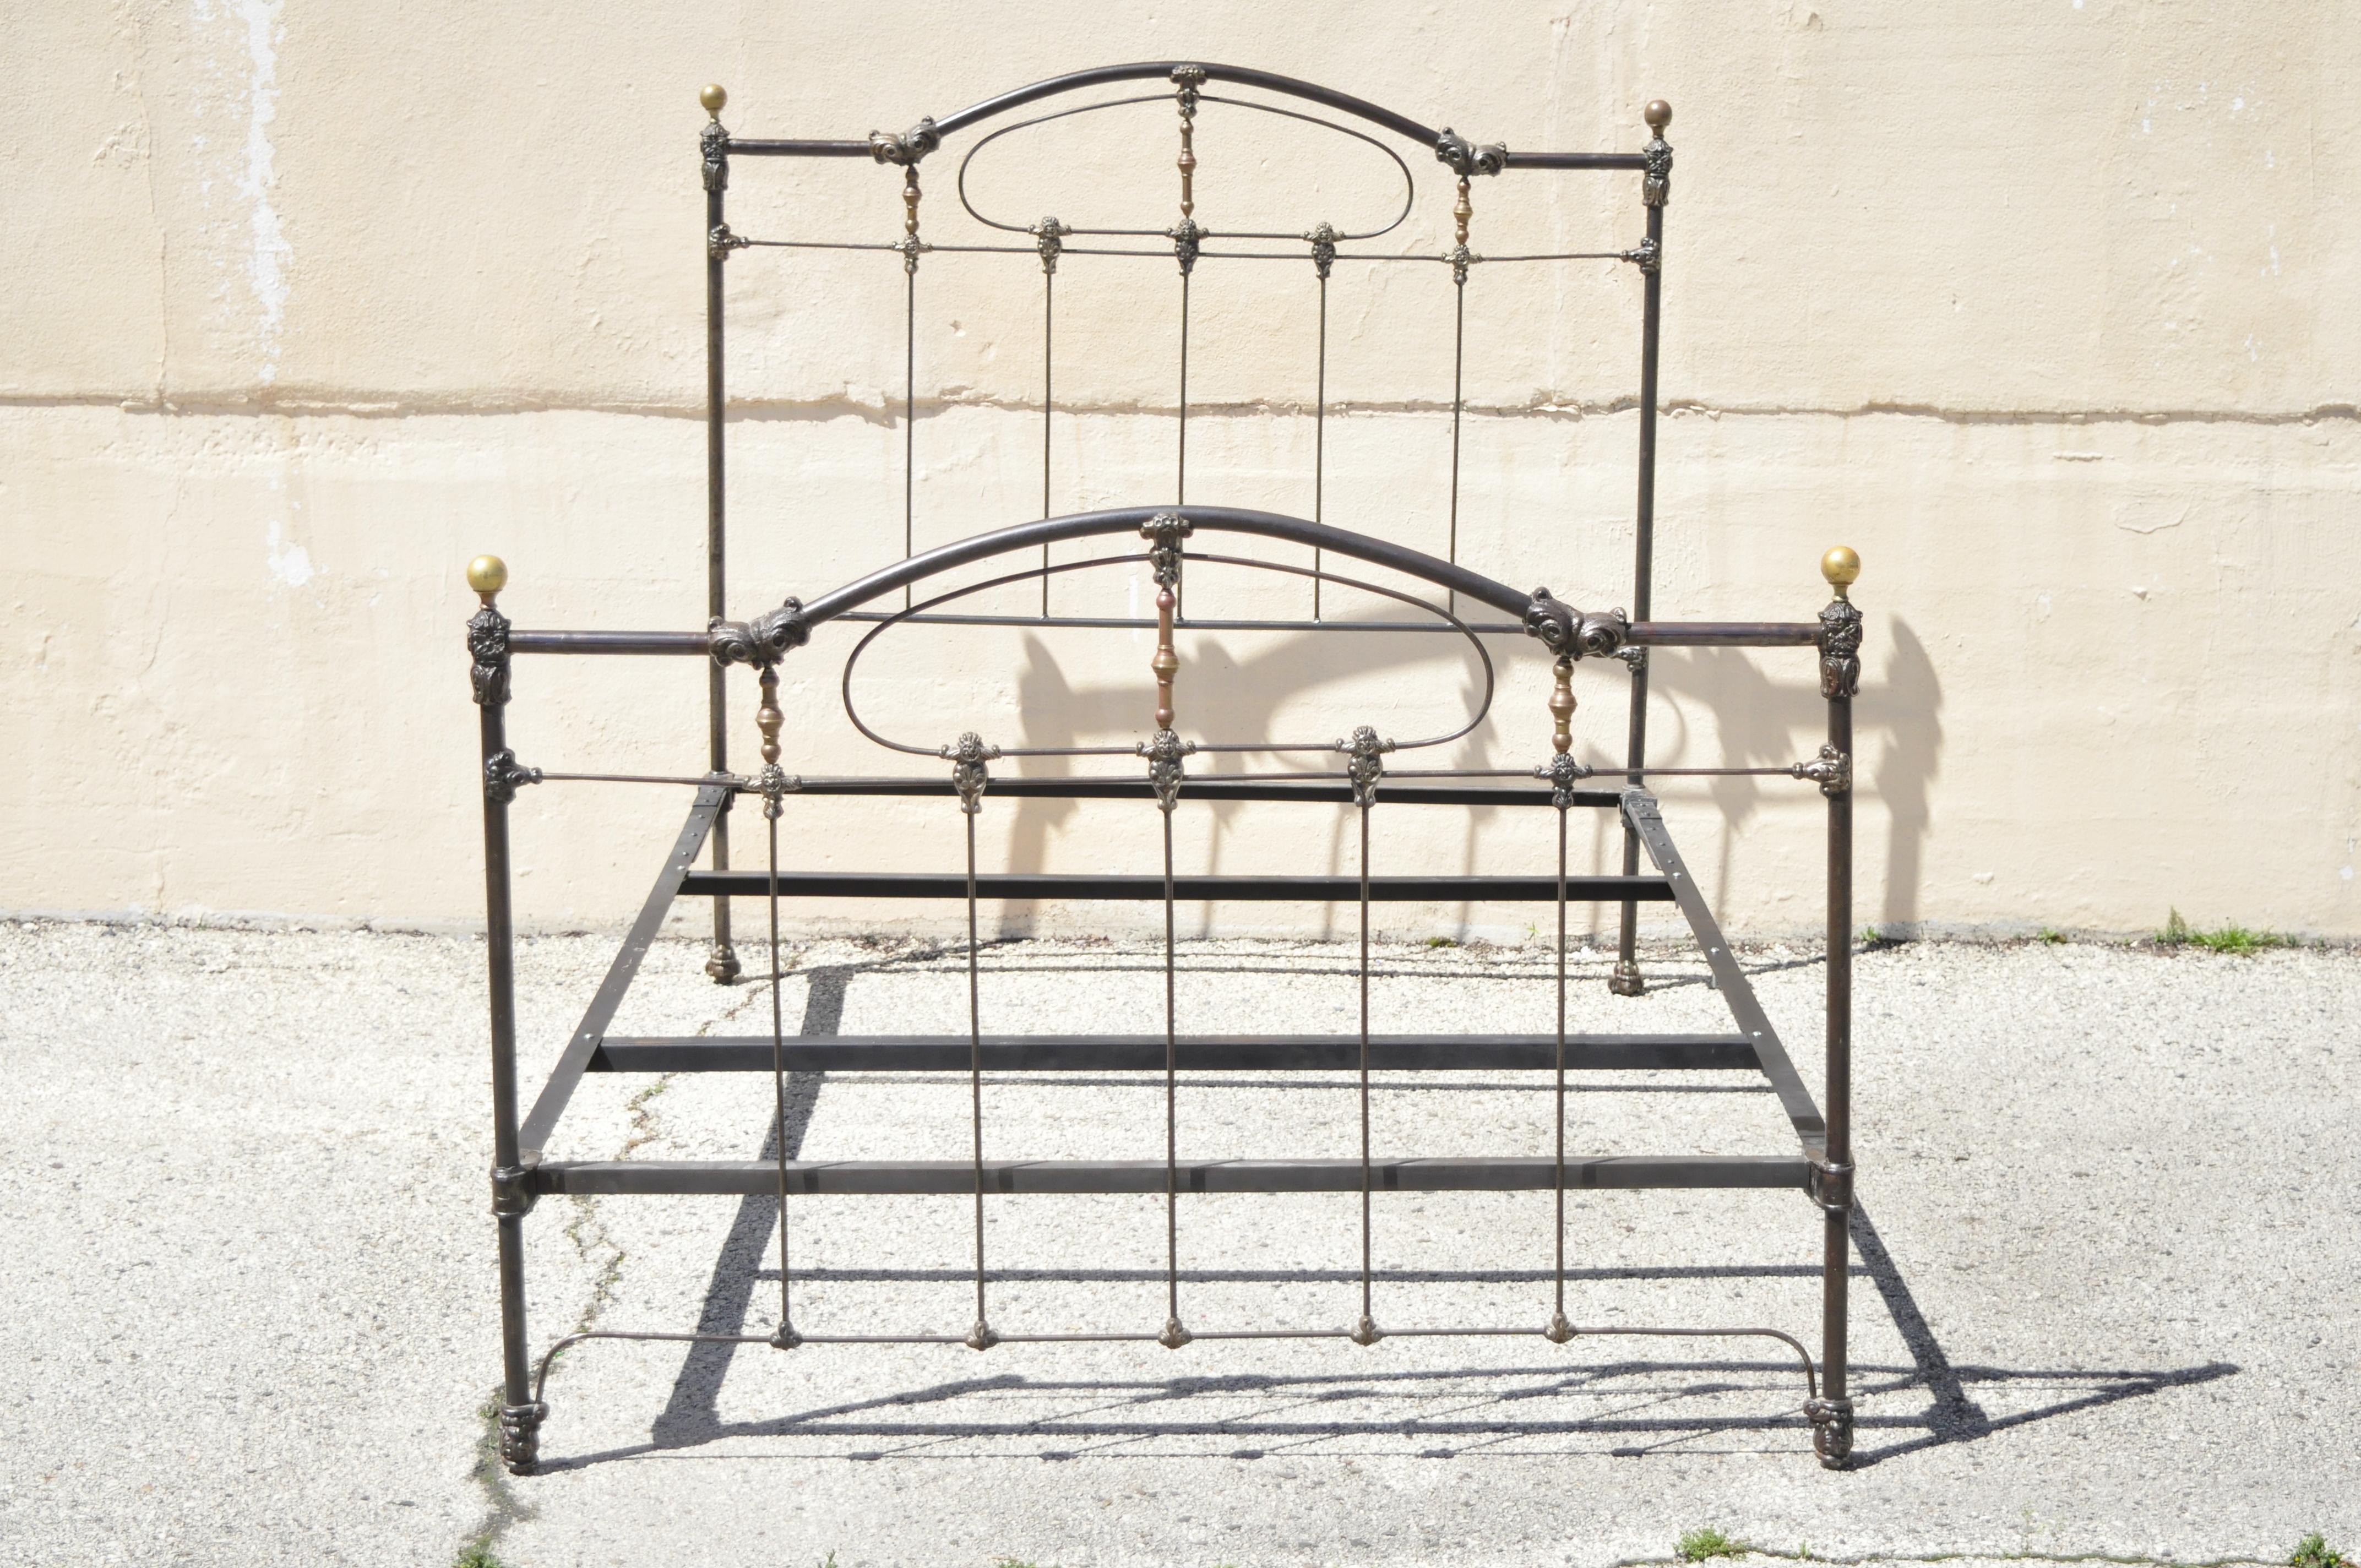 Antique Victorian cast iron brass and steel queen size bed frame with brass finials. Item features queen size frame, brass ball finials, steel iron frame, very nice antique item, great style and form. Believed to be Late 19th Century. Measurements: